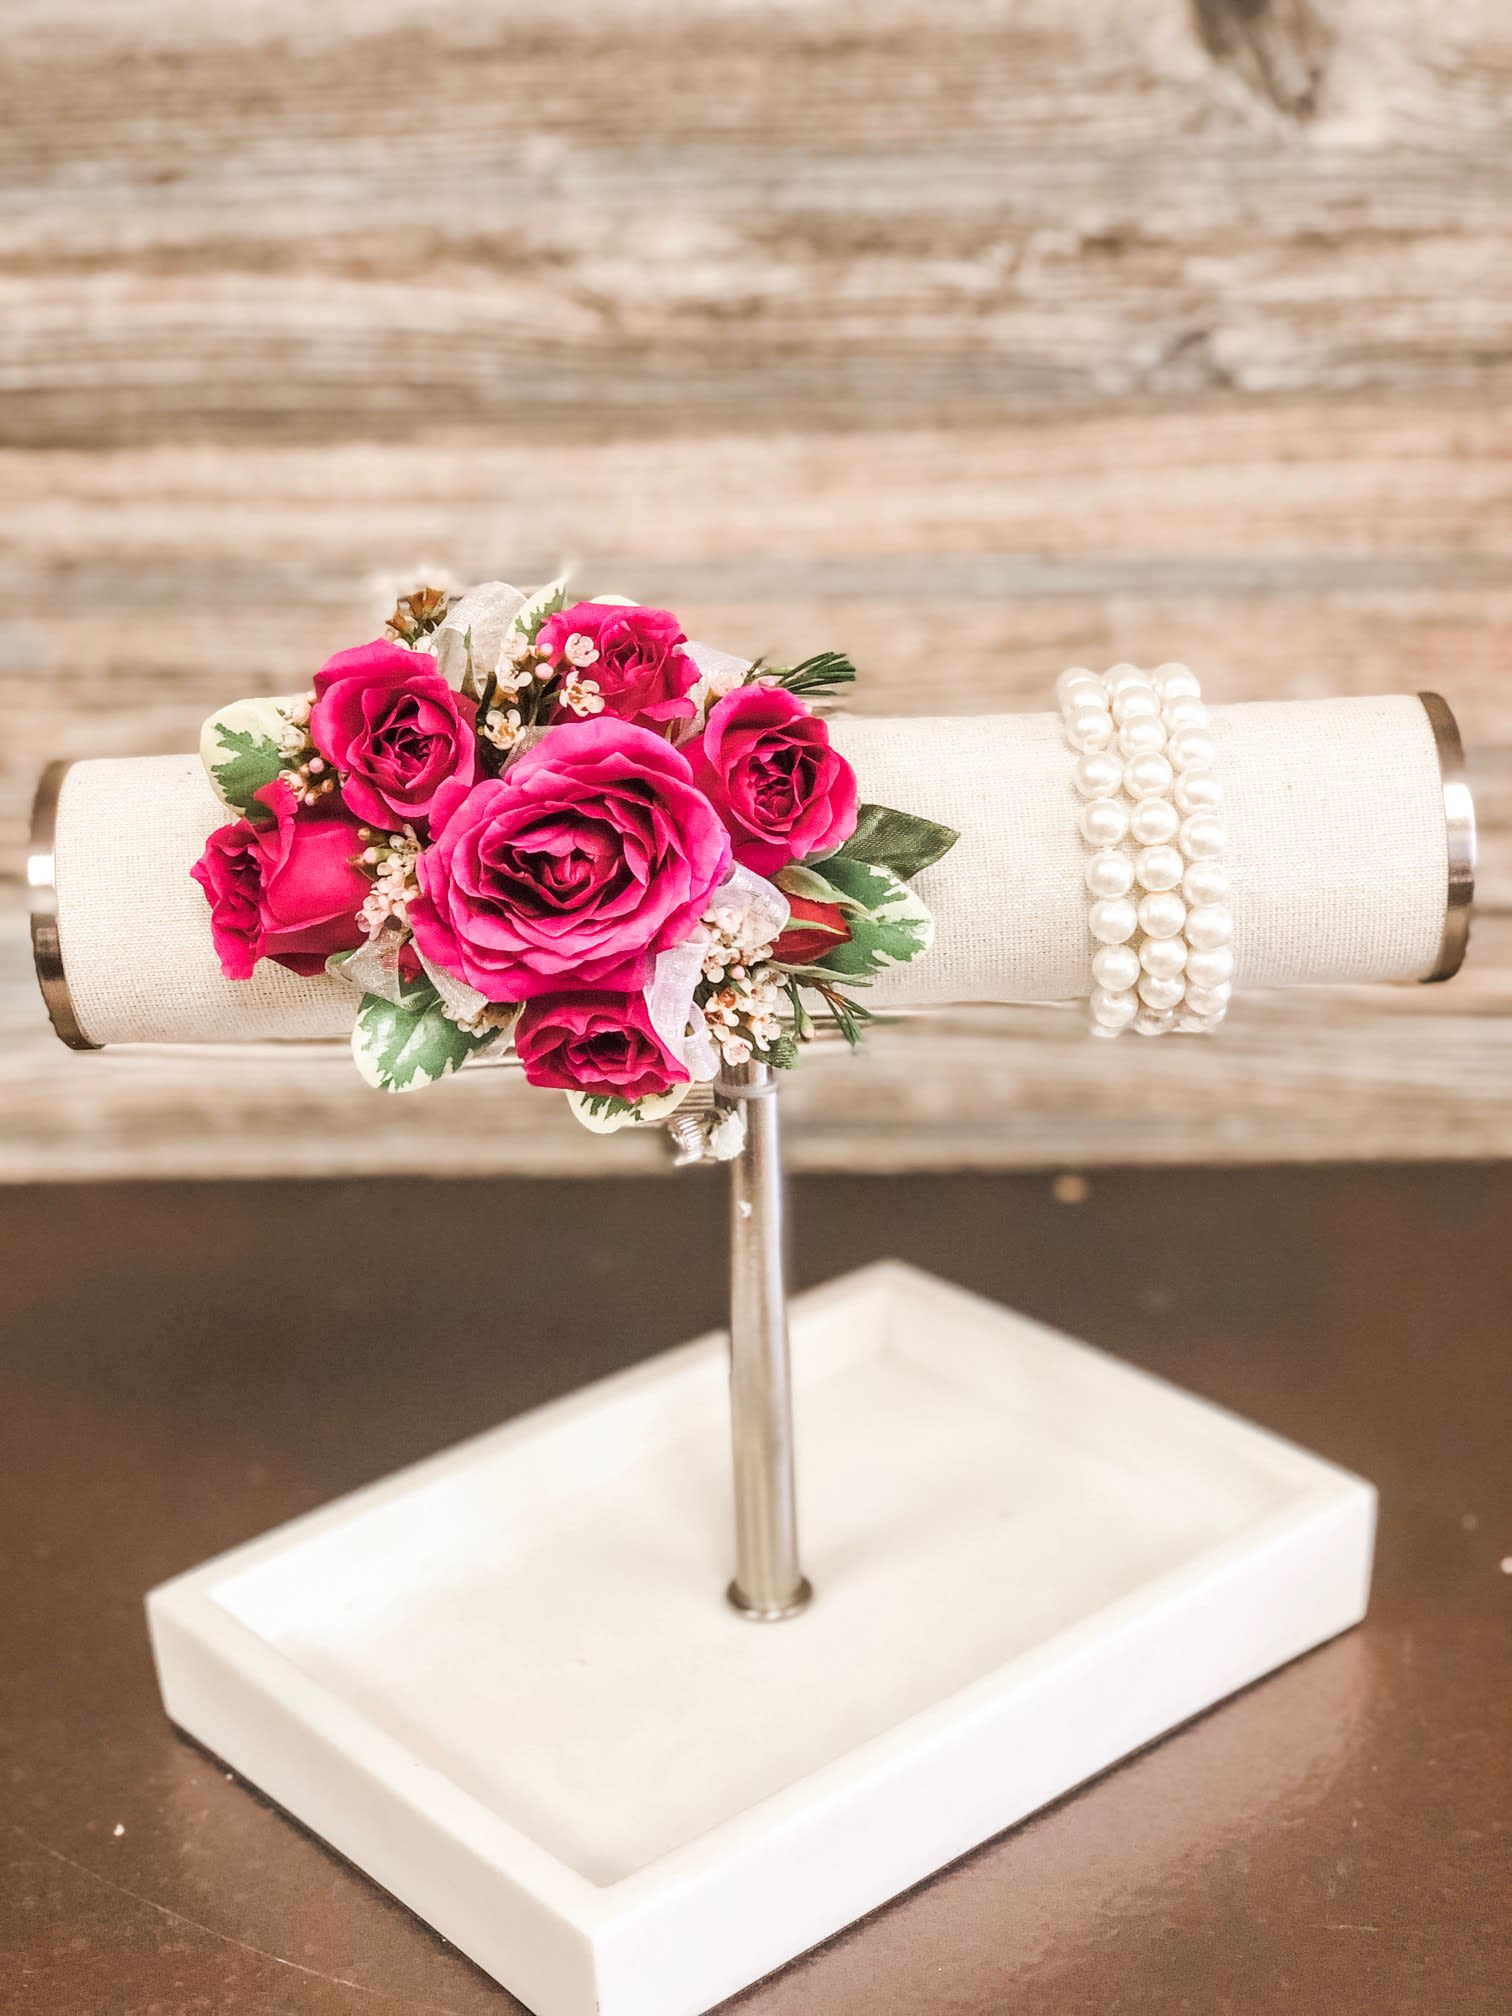 Hot Pink Spray Rose Corsage with Upgraded Wristlet - Hot pink spray roses, sheer ribbon, white or light pink filler flower on a bed of greenery.  Wristlet and ribbon color can be customized.   Ribbon:  can match or compliment any dress color Wristlets: white, pearl beaded band. 